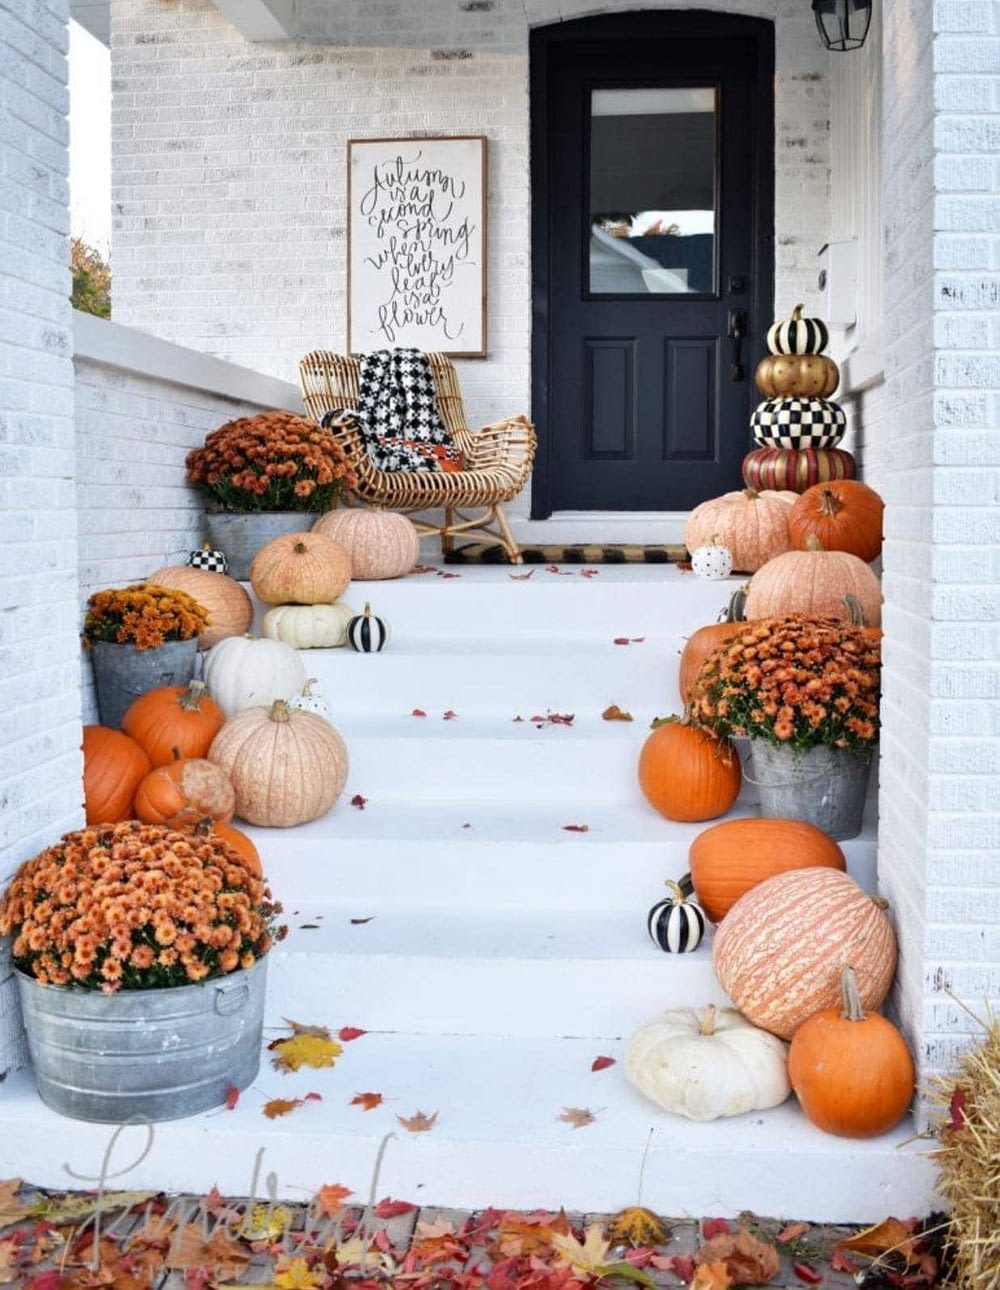 Fall front porch ideas using tons of pumpkins on each step leading to the front door